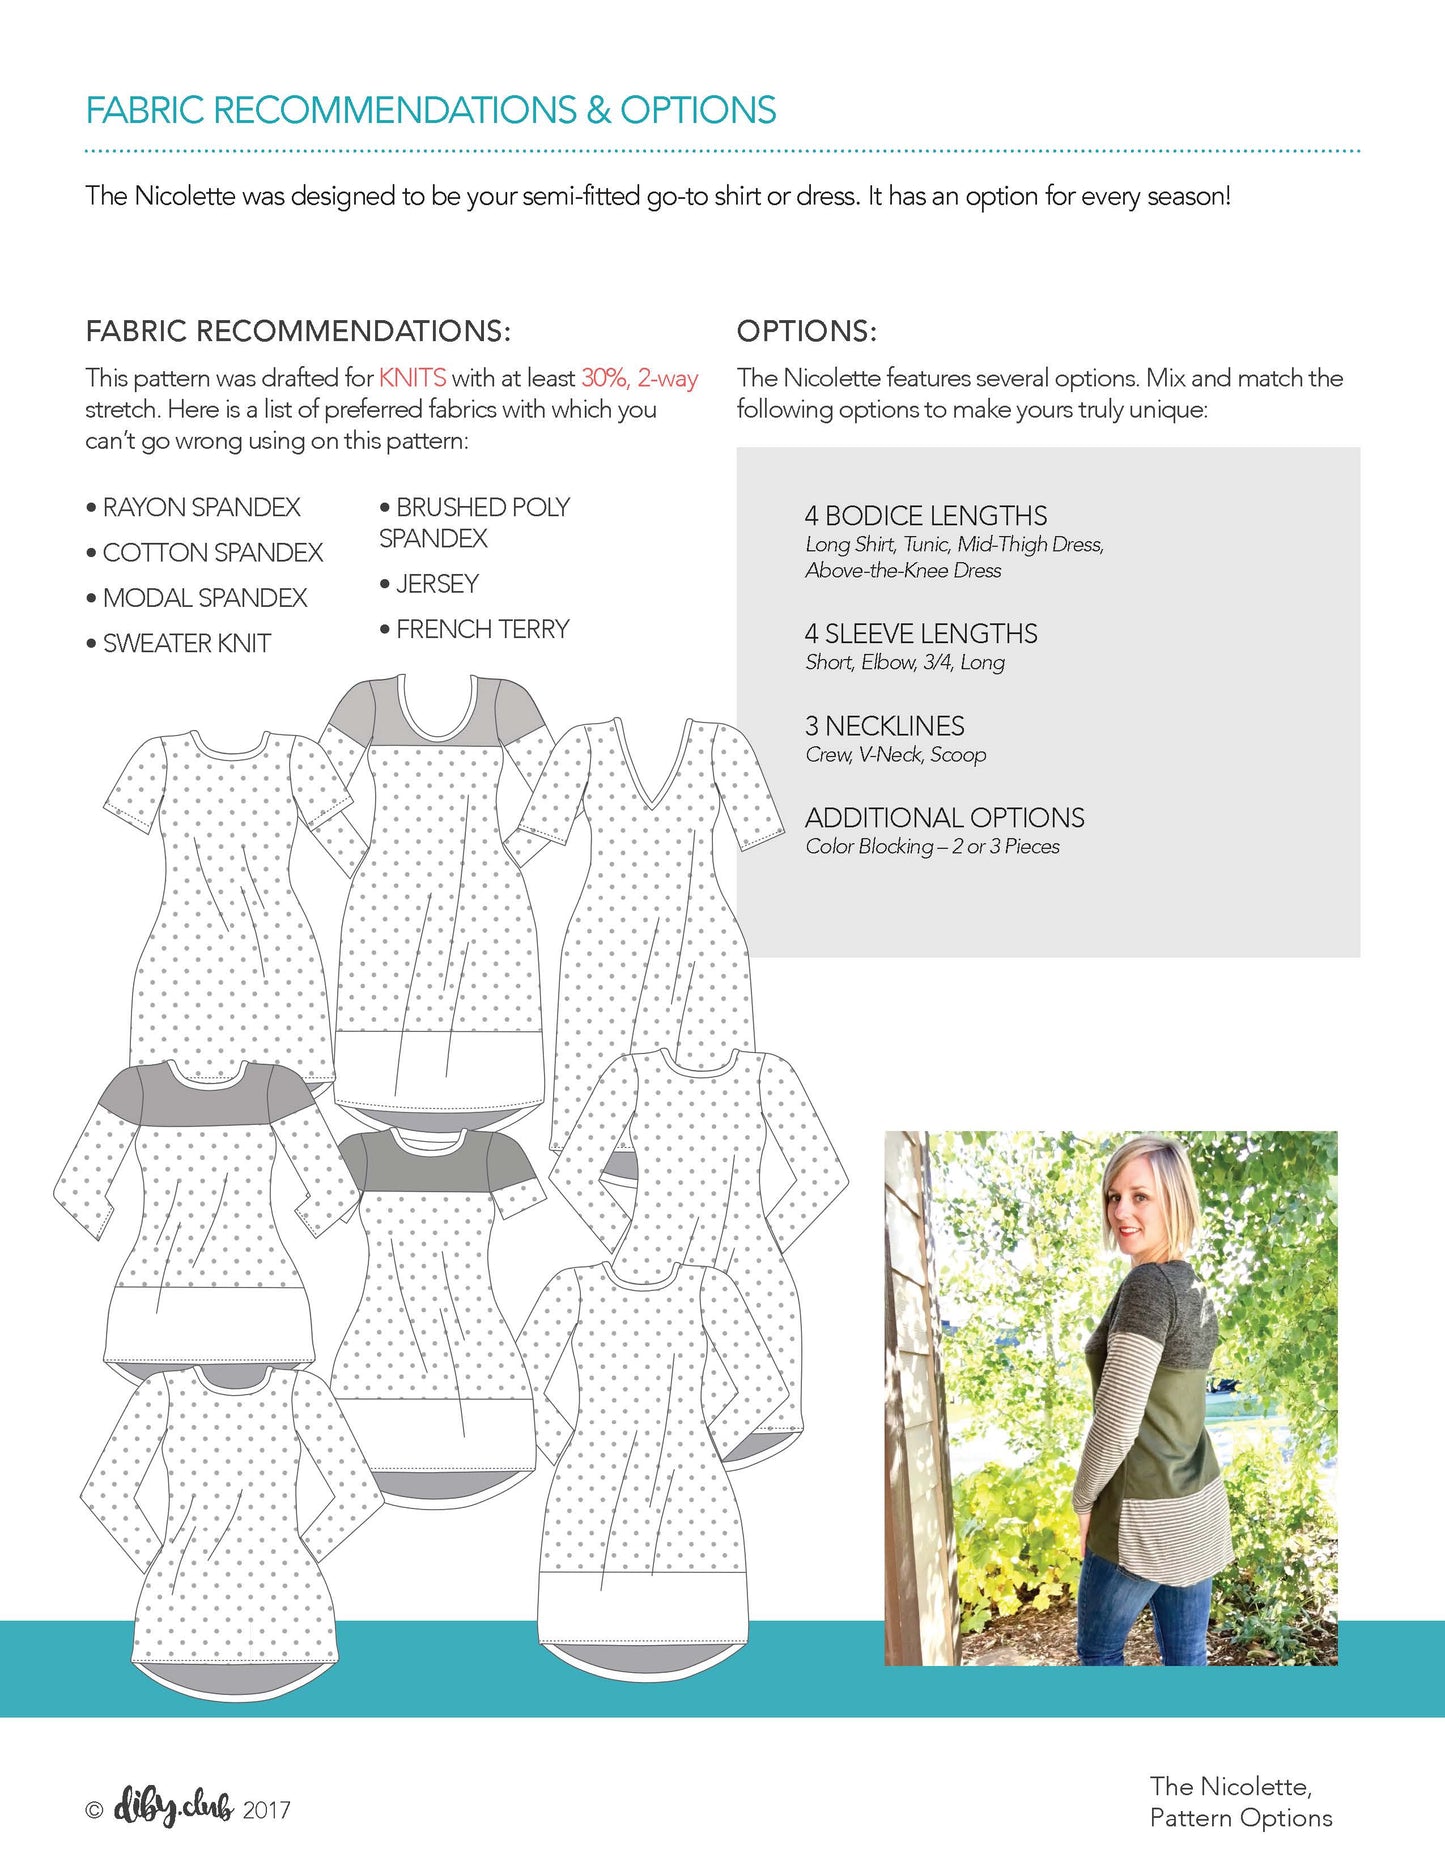 The Nicolette Pattern Options and Fabric Recommendations. 